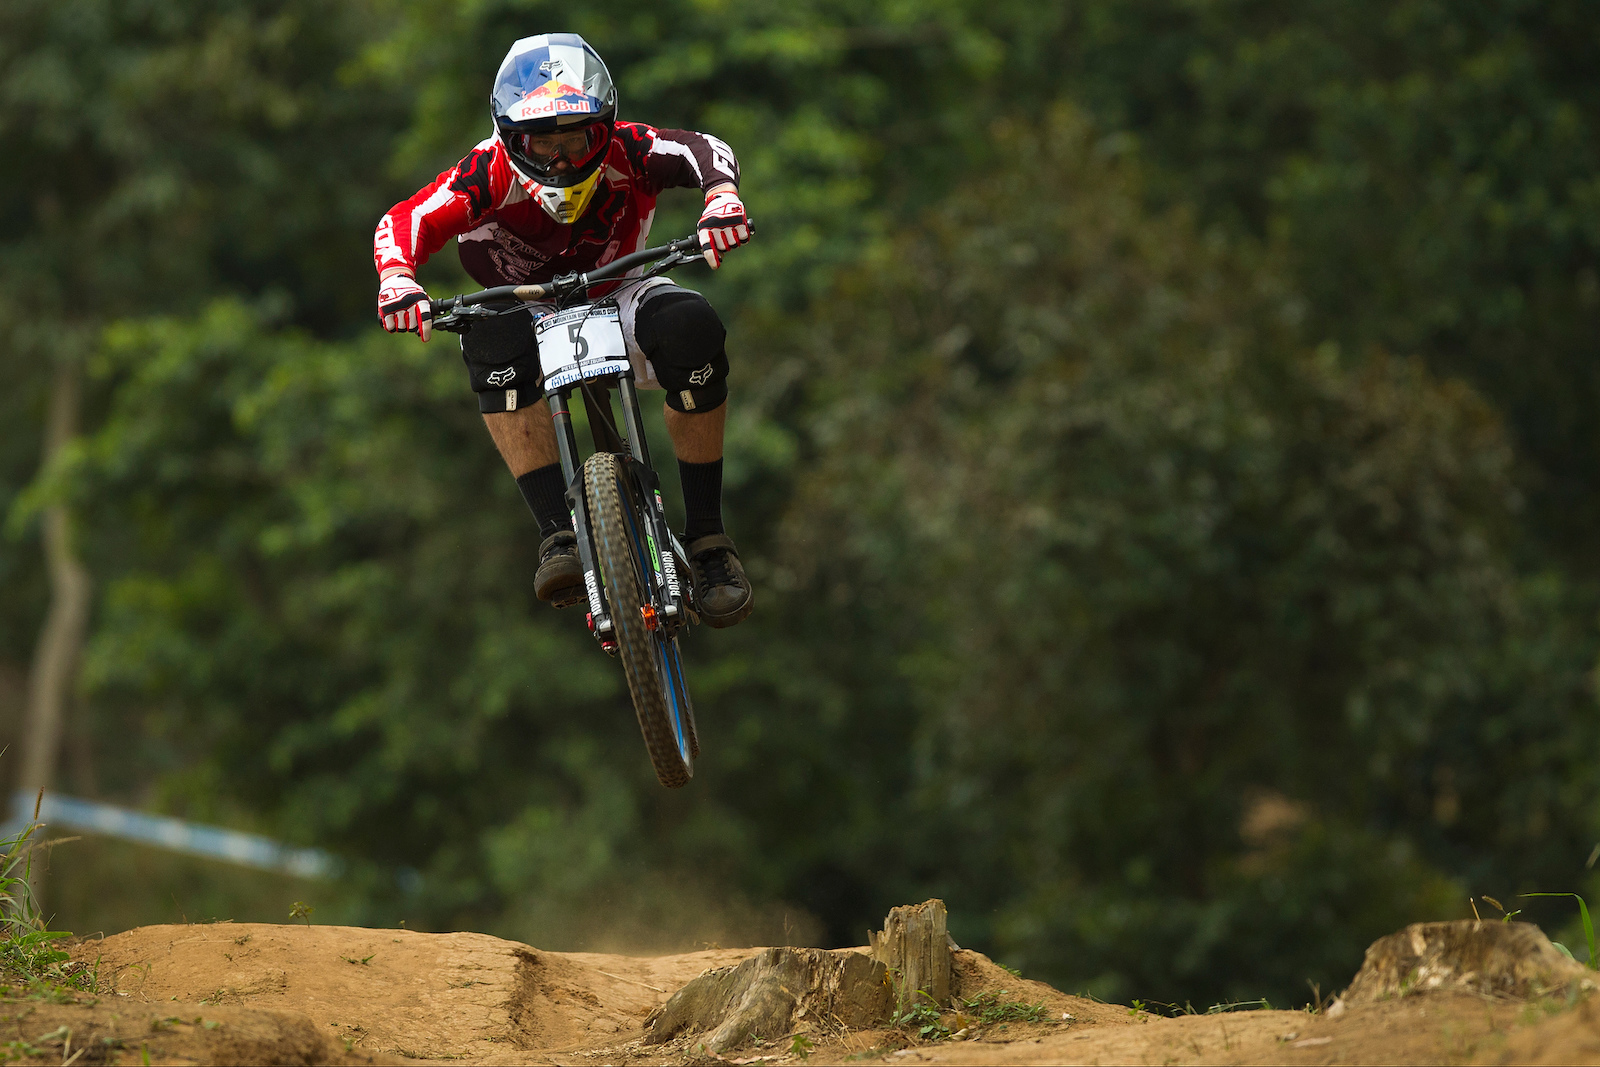  during the first round of the UCI MTB World Cup held in Pietermaritzburg South Africa. Photo Sven Martin